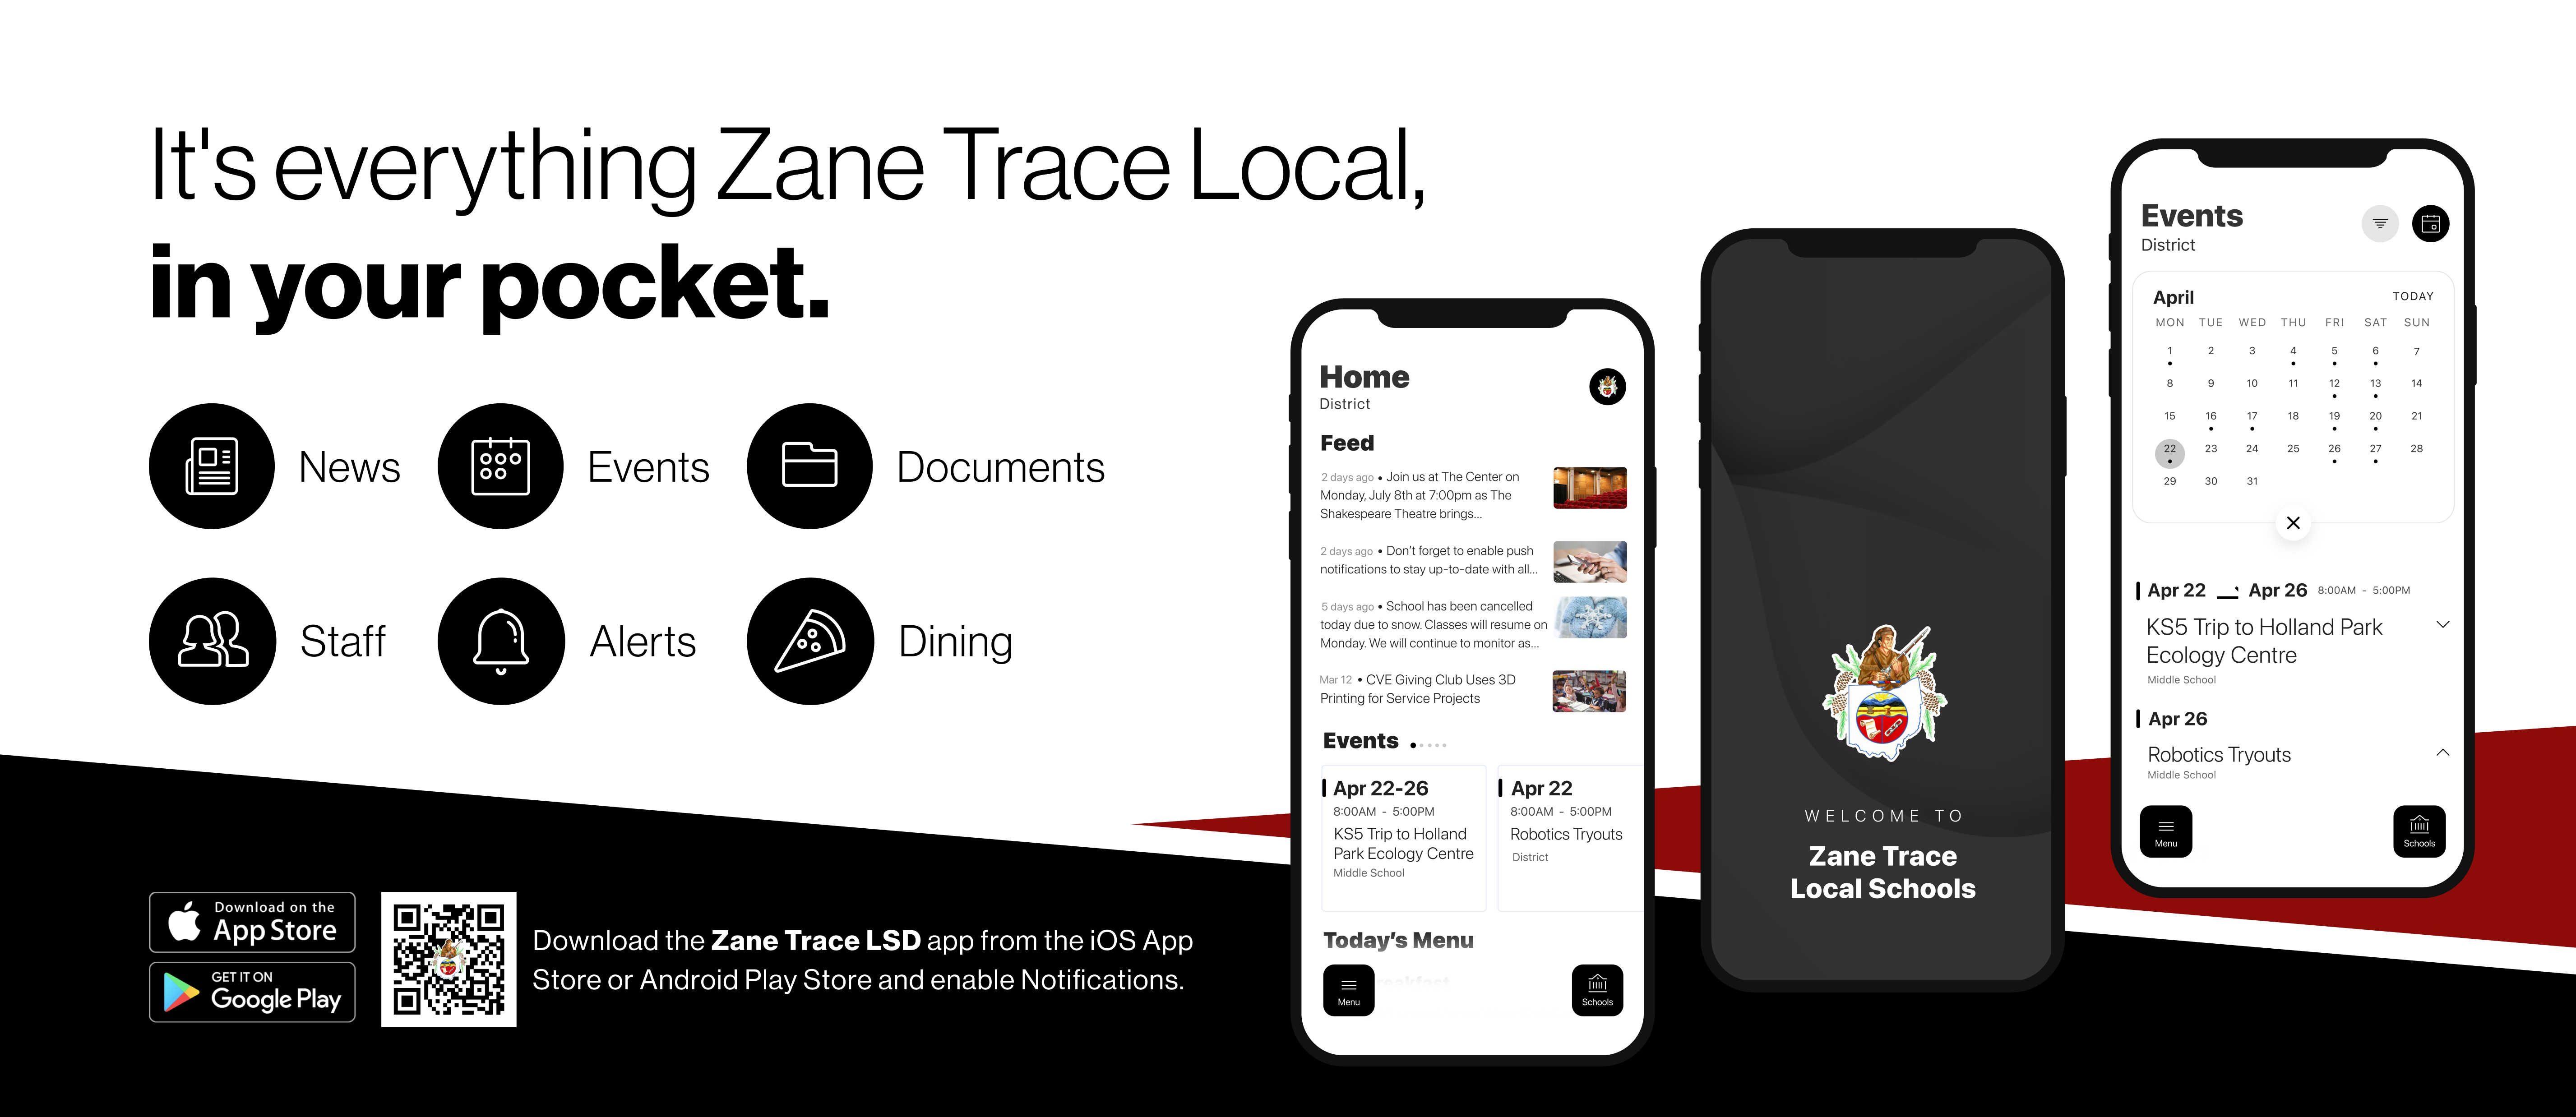 It's everything Zane Trace, in your pocket.